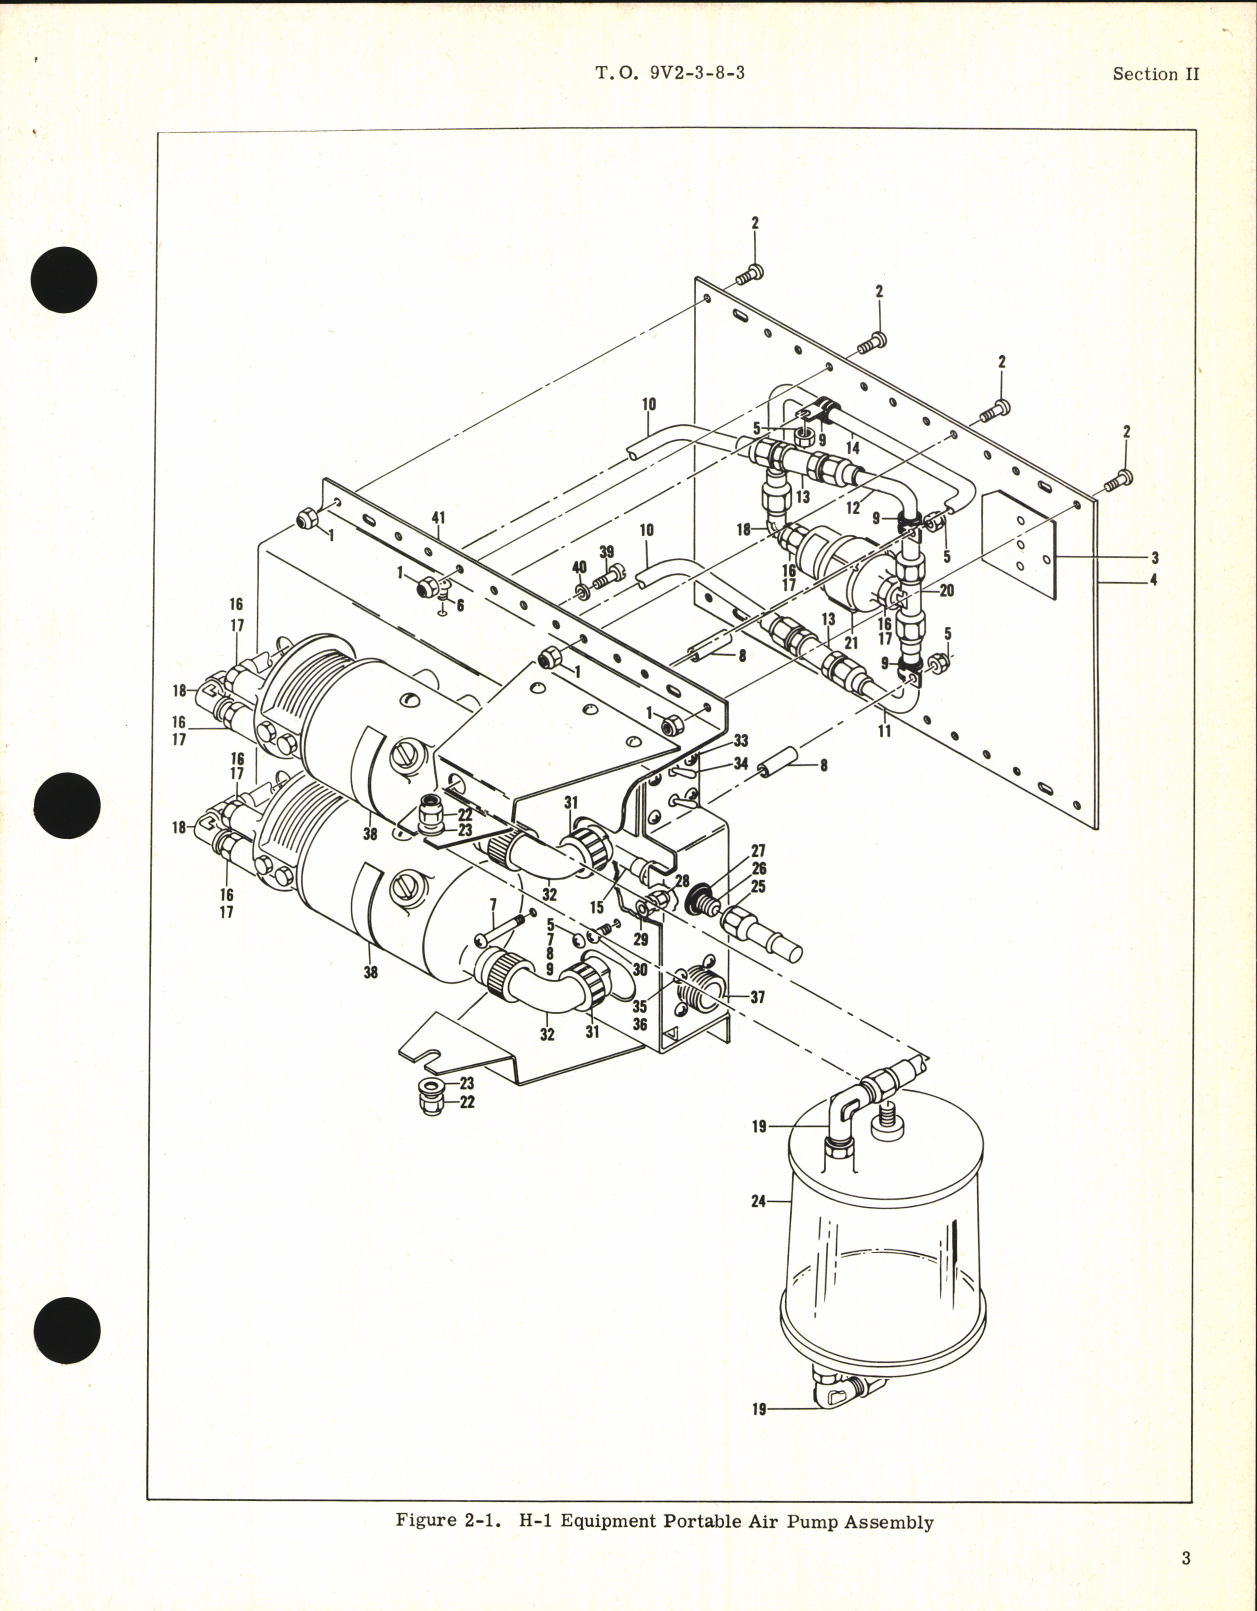 Sample page 3 from AirCorps Library document: Handbook of Overhaul Instructions for H-1 Equipment Portable Air Pump Assembly Part No. 5-36434-9